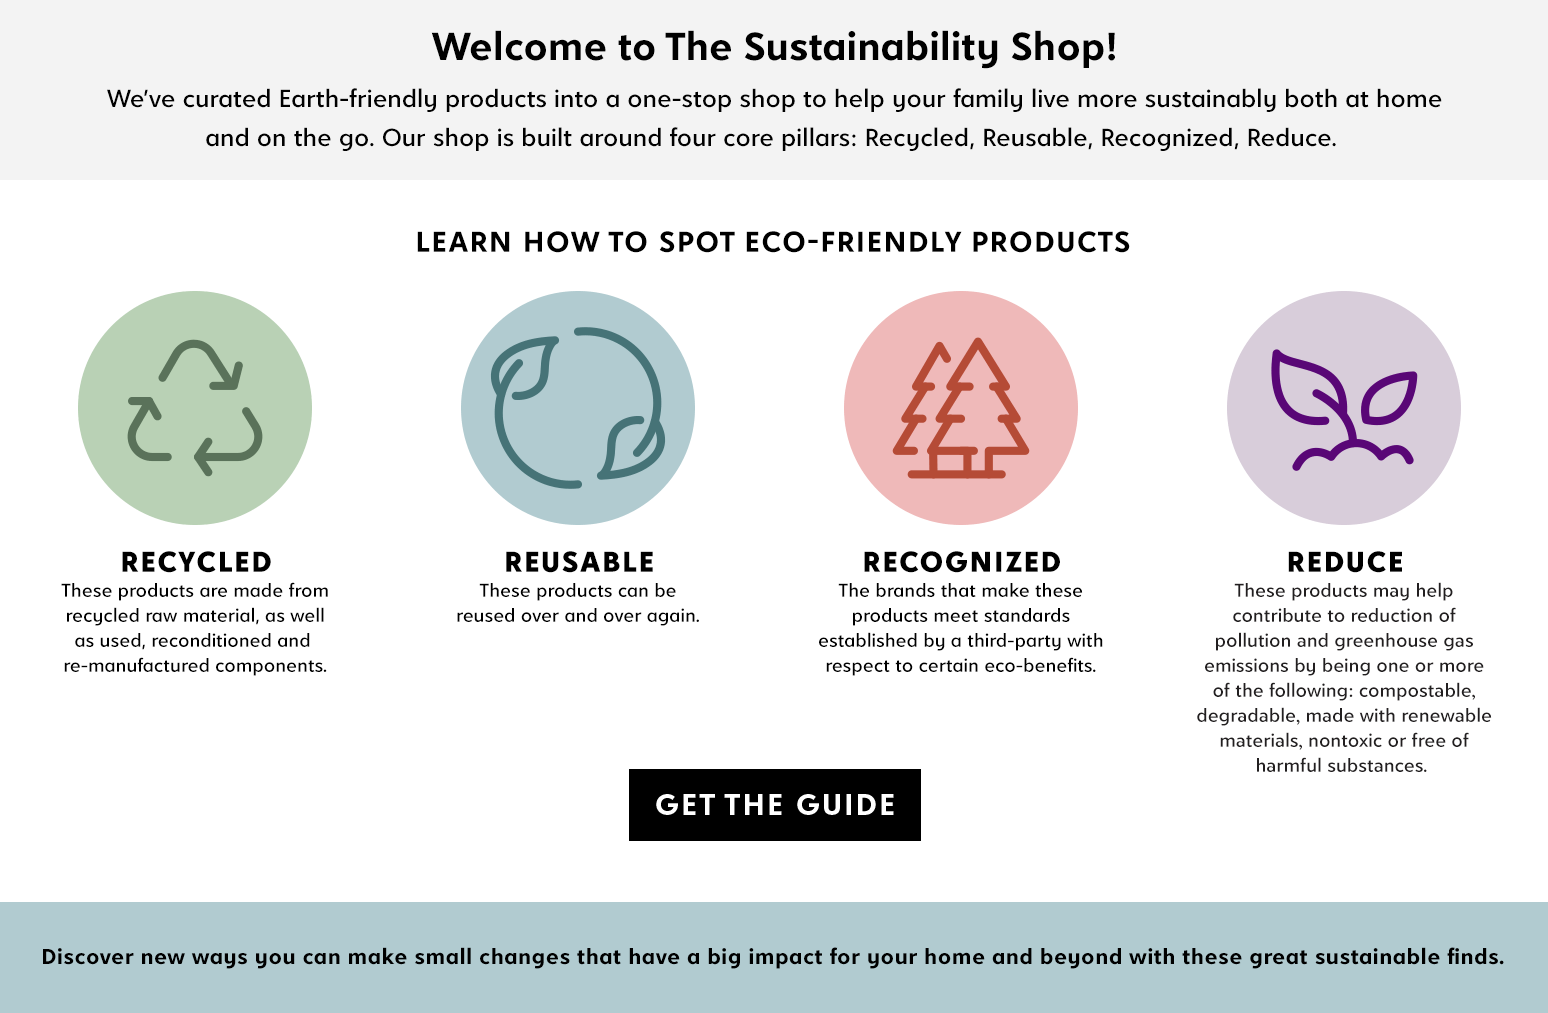 Welcome to the sustainability shop!